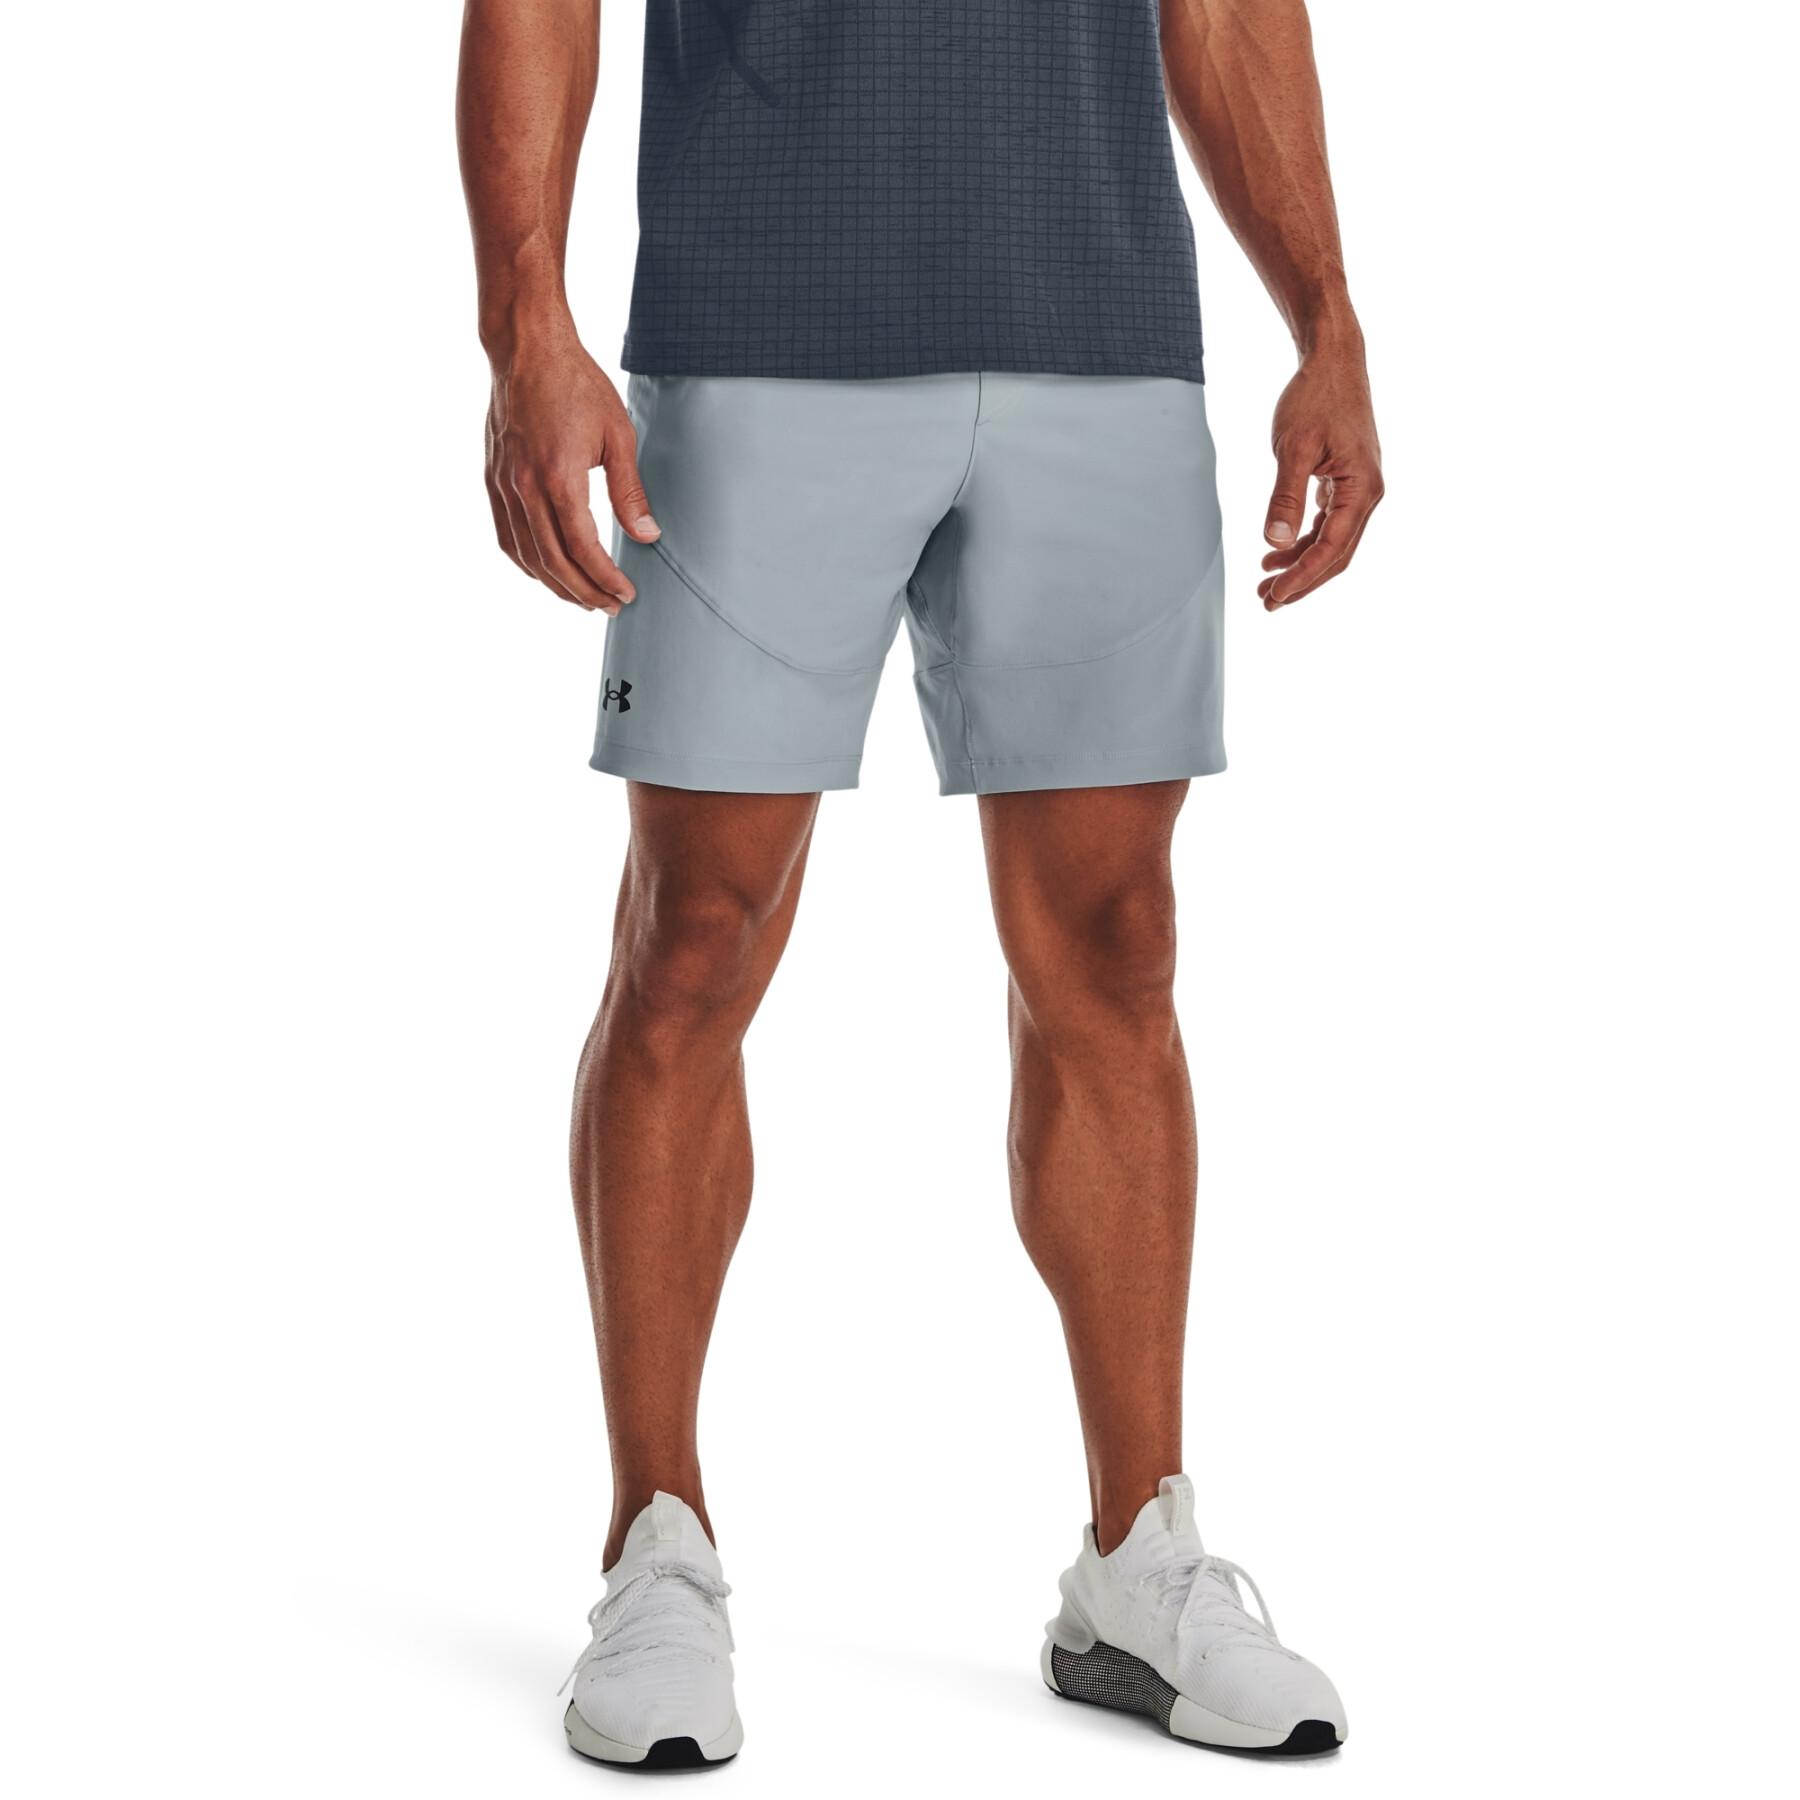 Short hybride Under Armour Unstoppable